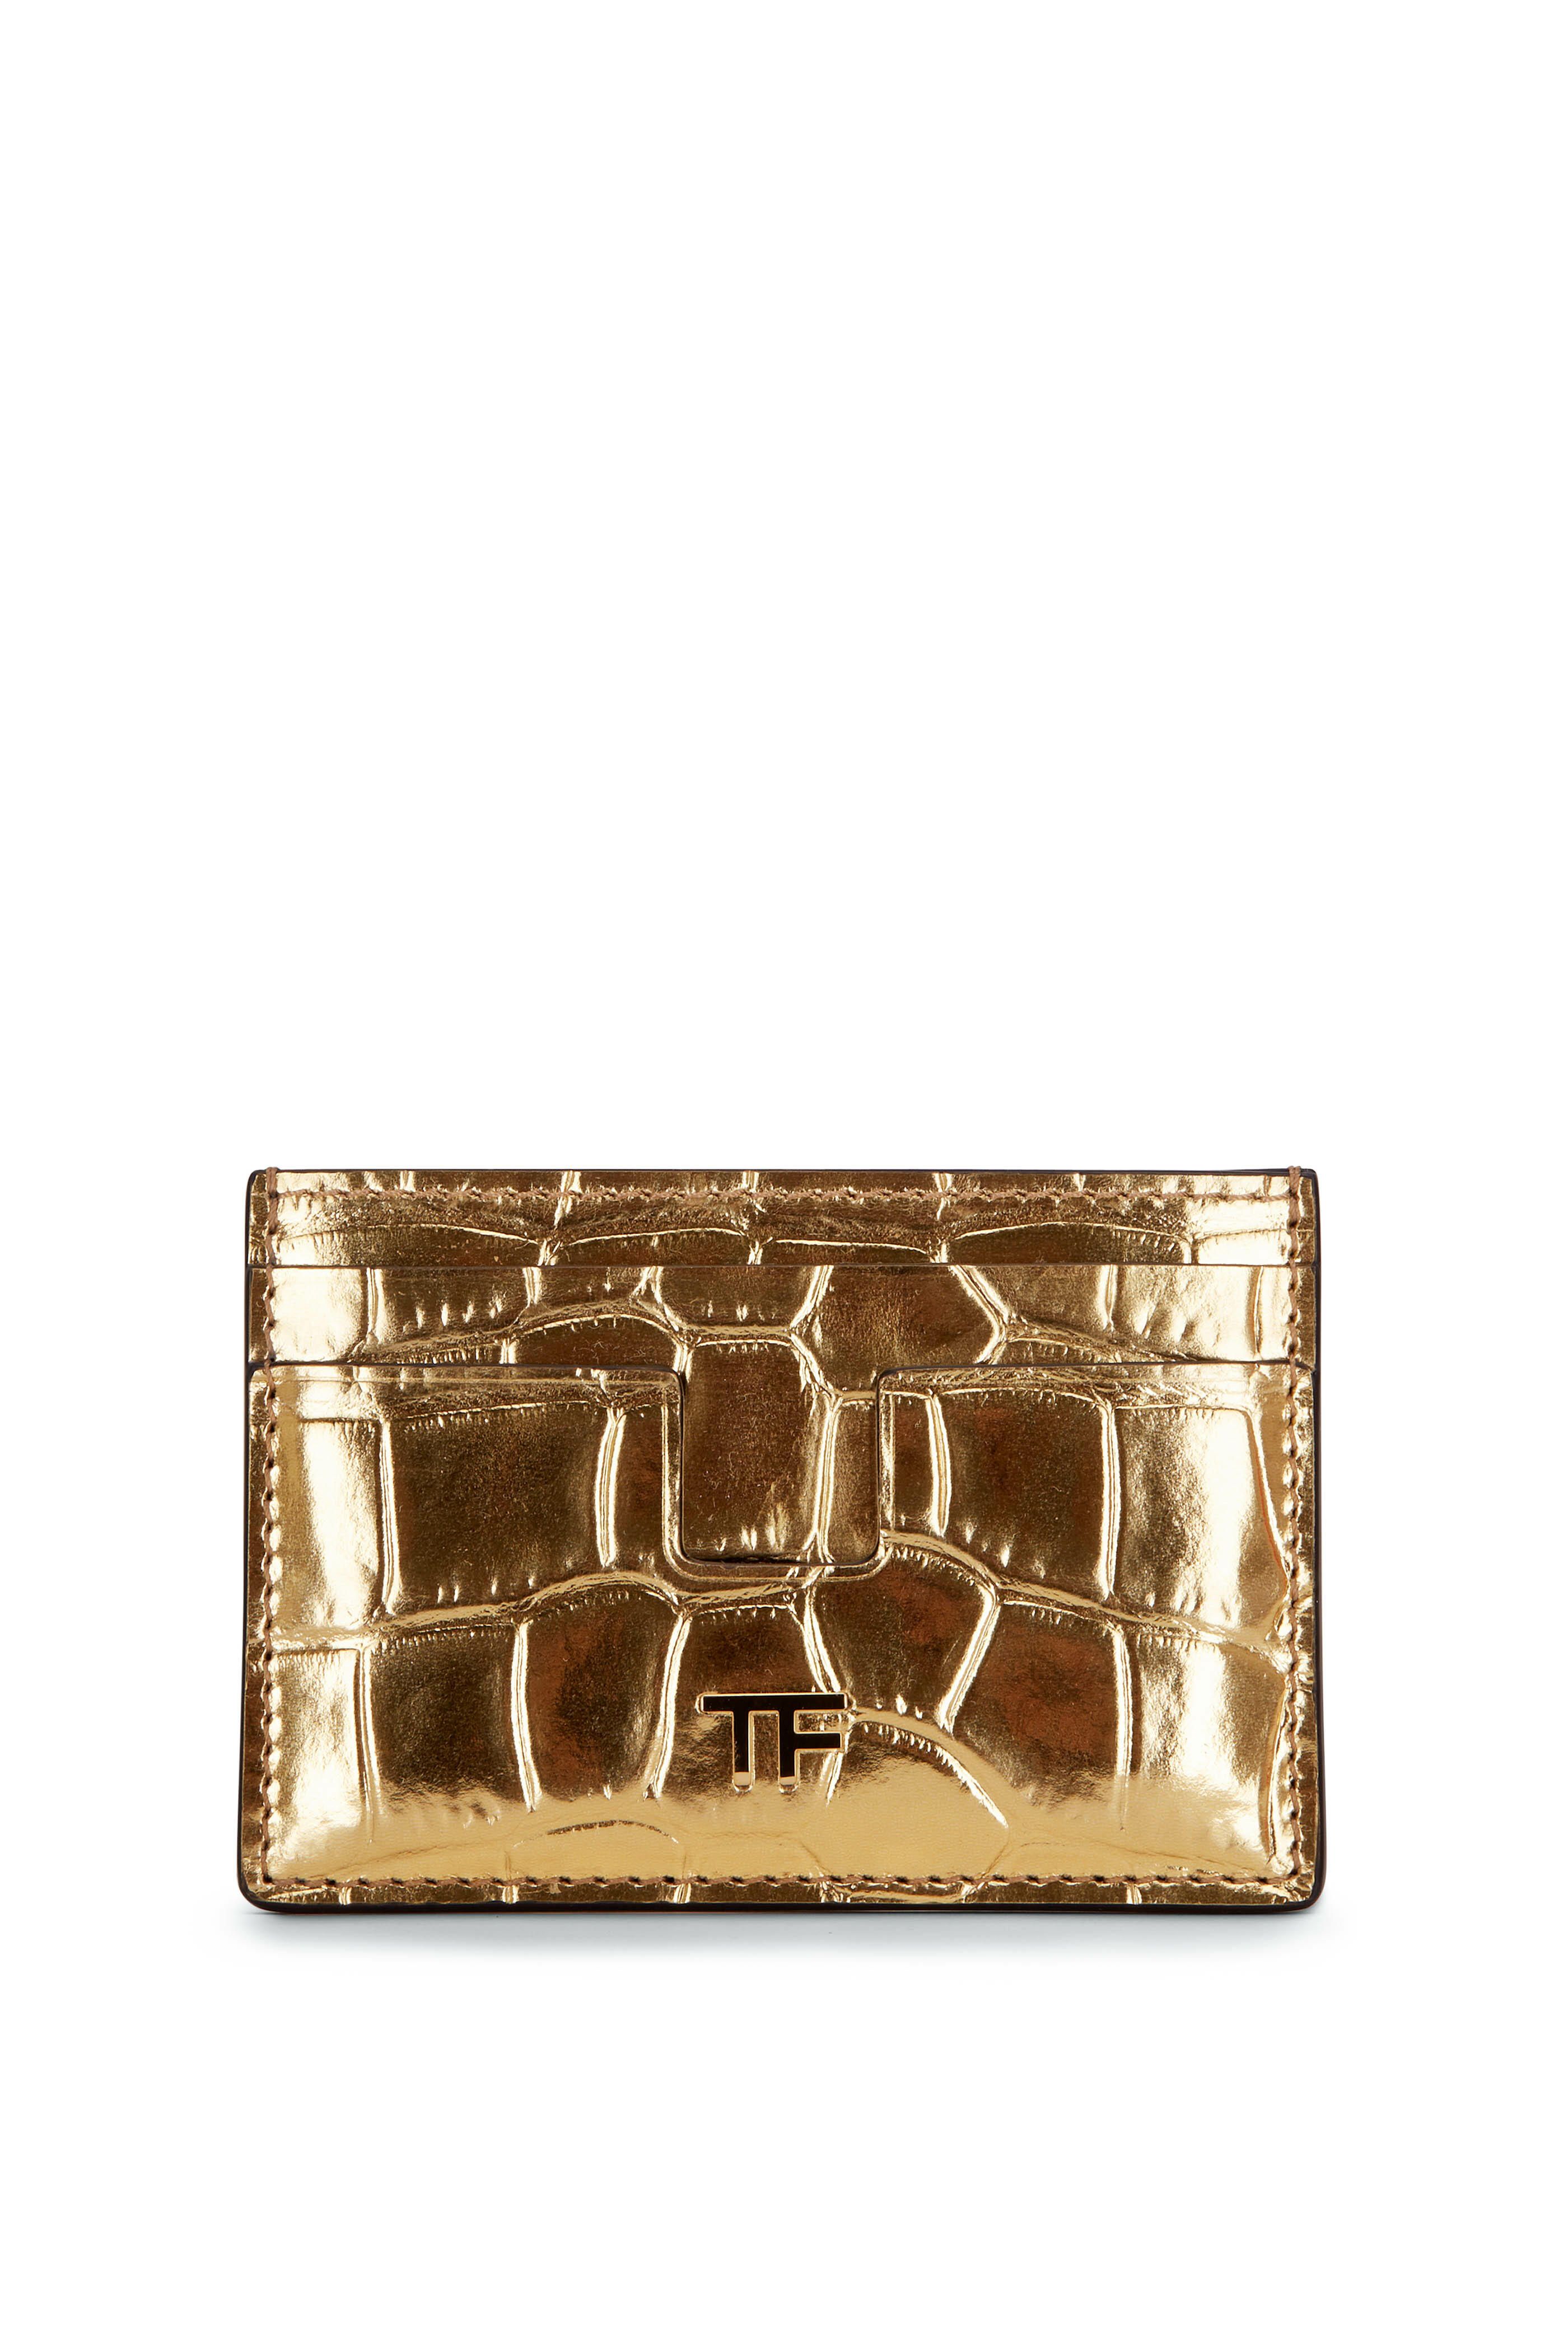 TOM FORD Lizard Embossed Metallic Leather Clutch in Gold